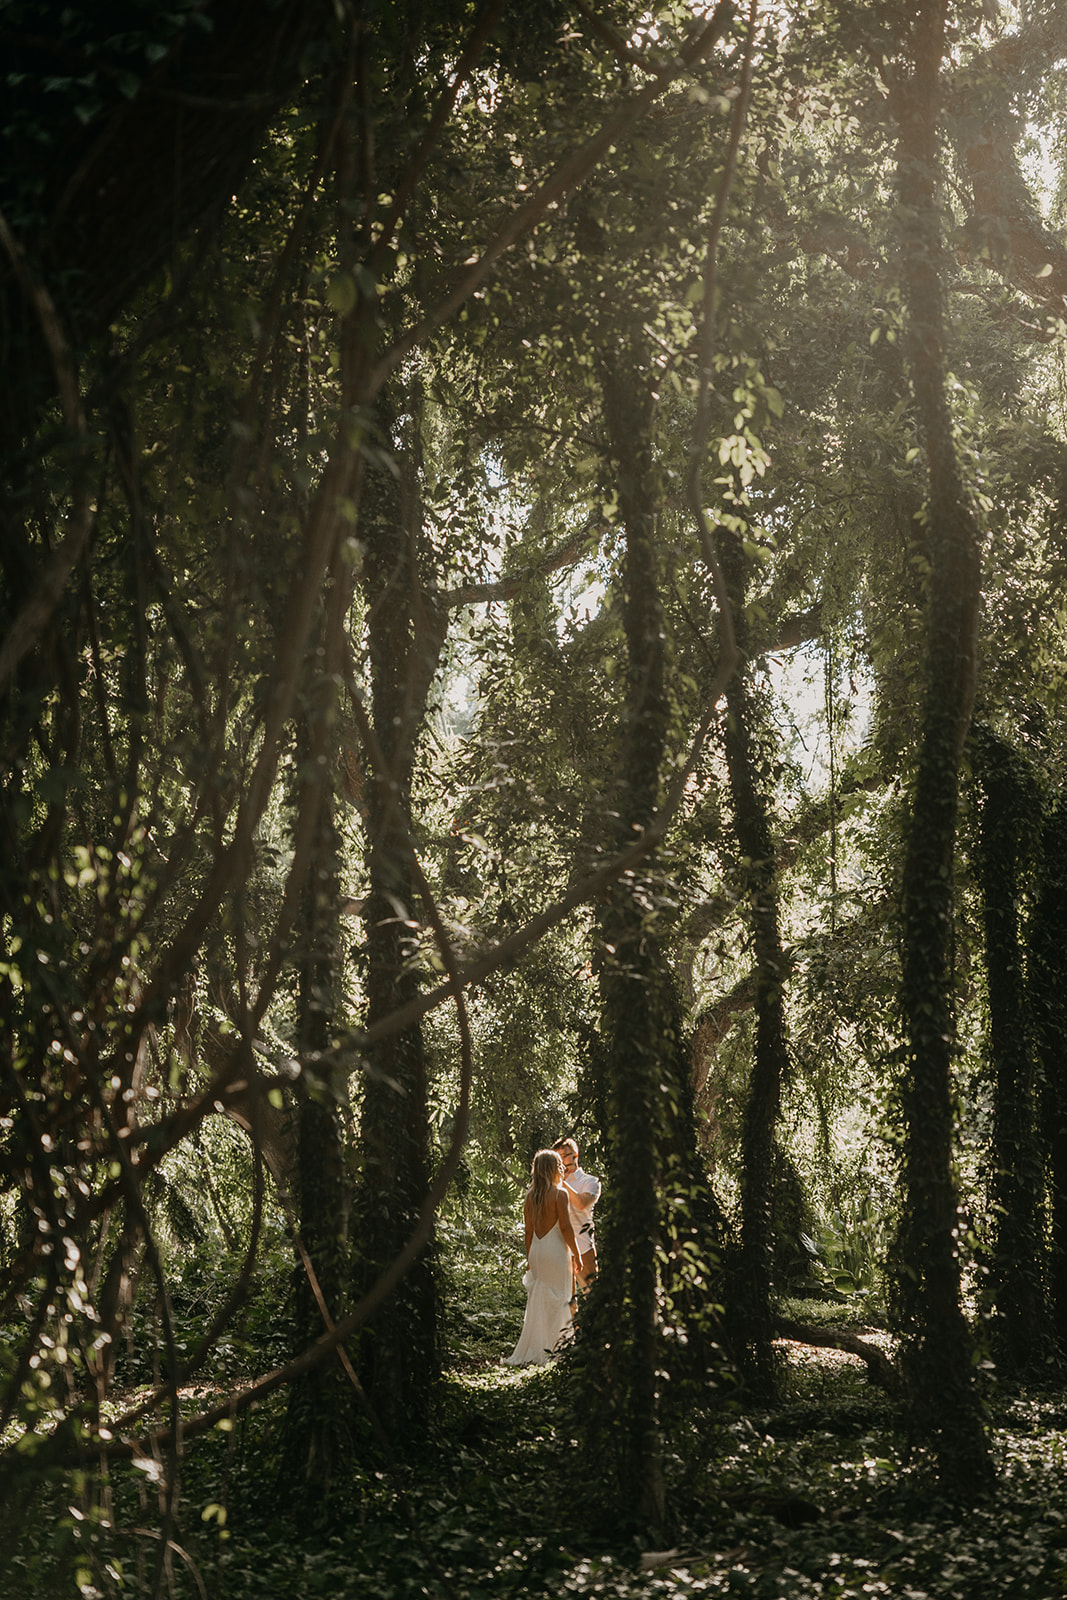 Couple who eloped in Maui, Hawaii exploring the Enchanted Forest at Honolua Bay during golden hour